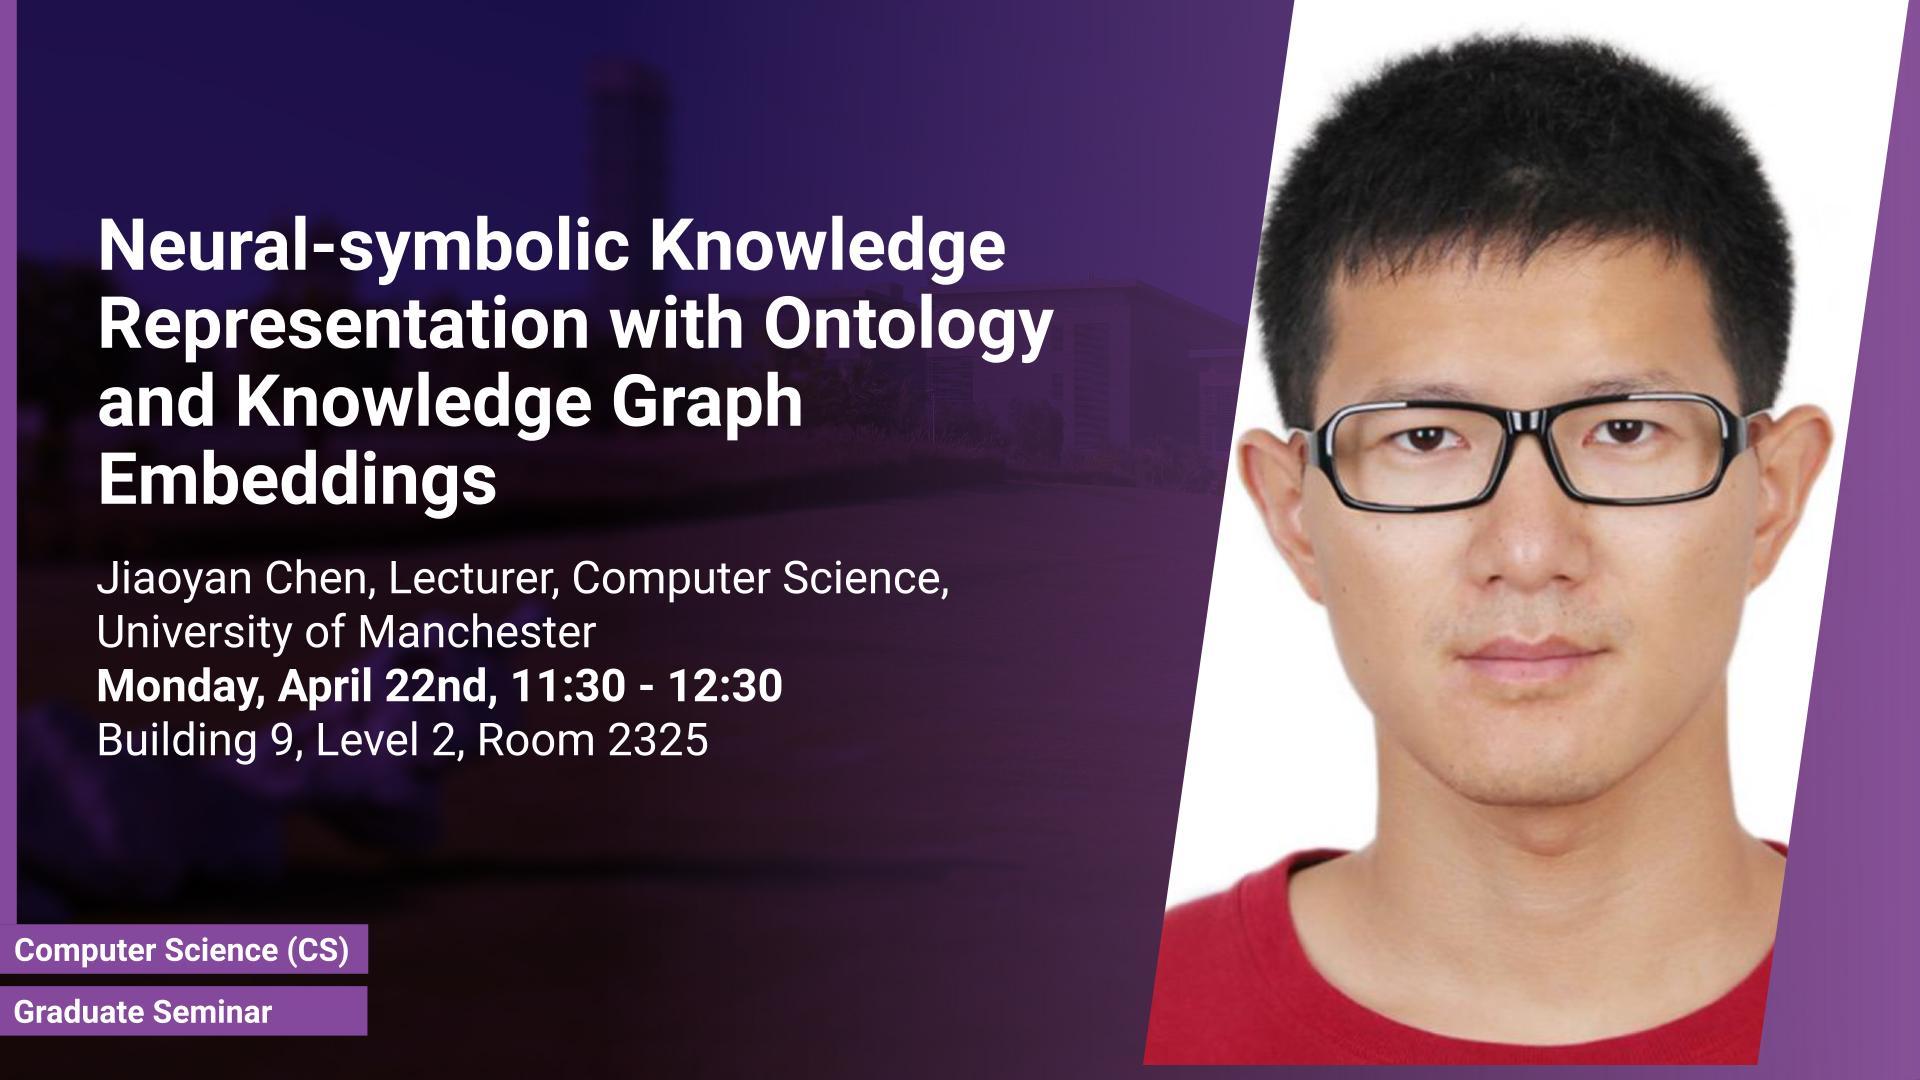 KAUST-CEMSE-AMCS-STAT-Graduate-Seminar-Jiaoyan-Chen-Neural-symbolic-Knowledge-Representation-with-Ontology-and-Knowledge-Graph-Embeddings.jpg